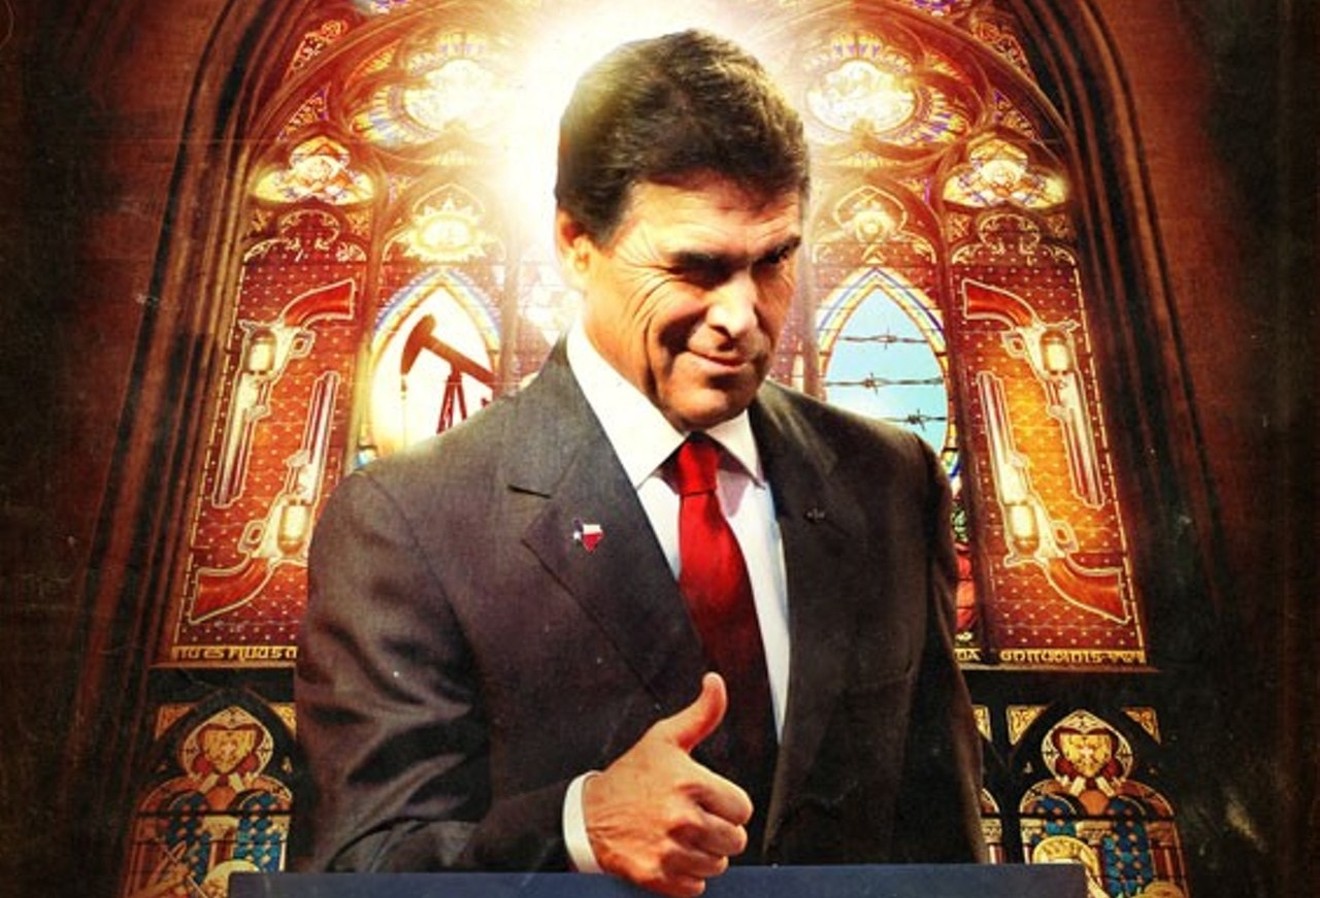 Former Texas Gov. Rick Perry's dominionist roots are showing.